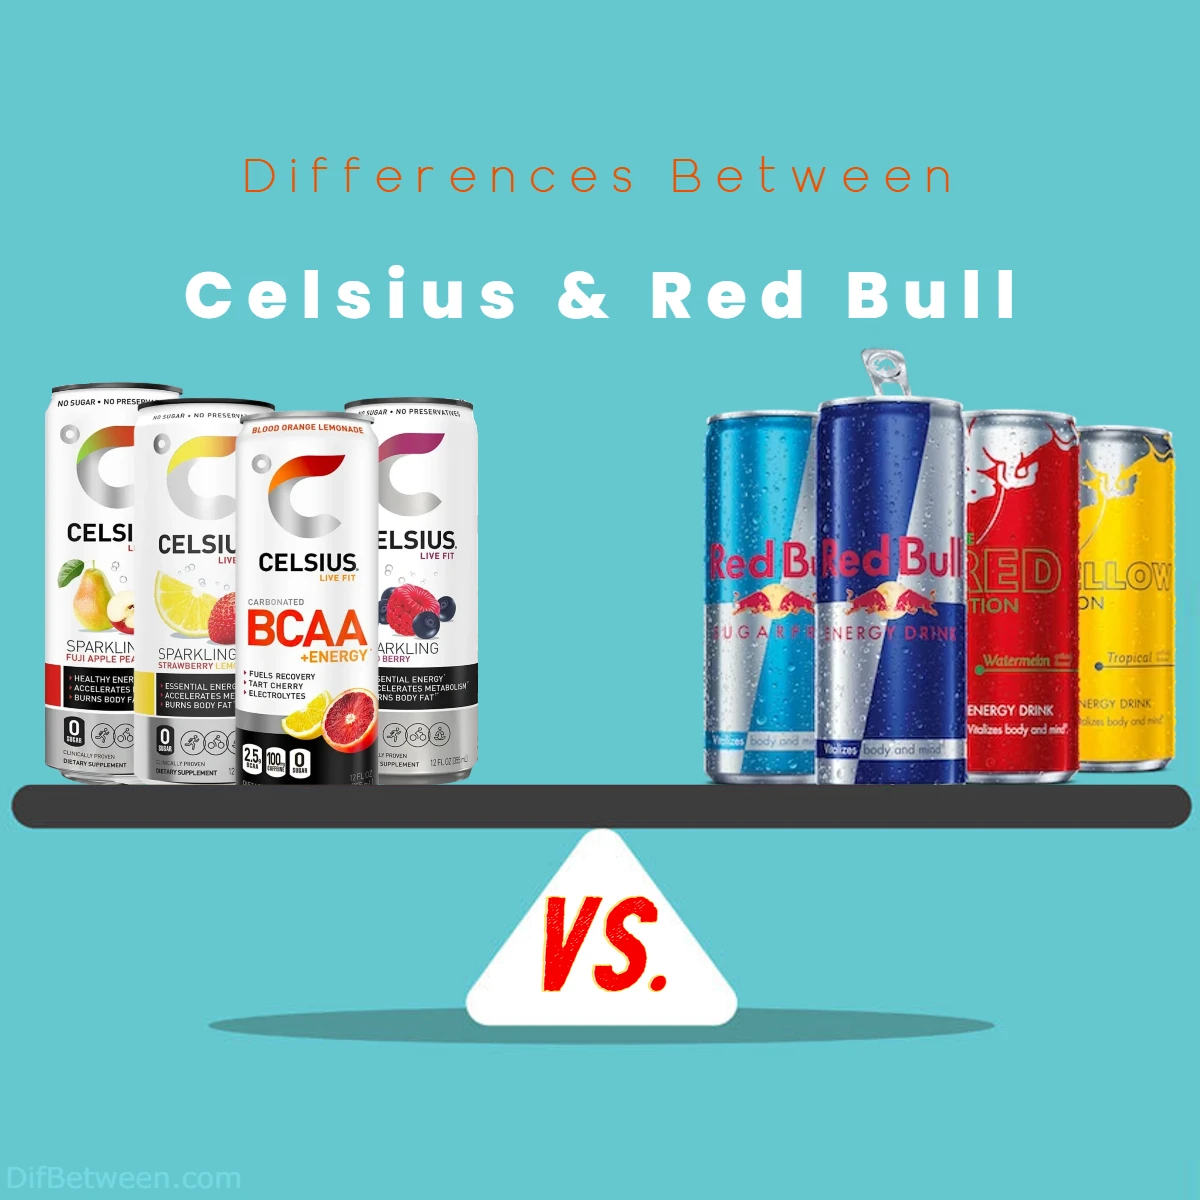 Differences Between Red Bull and Celsius